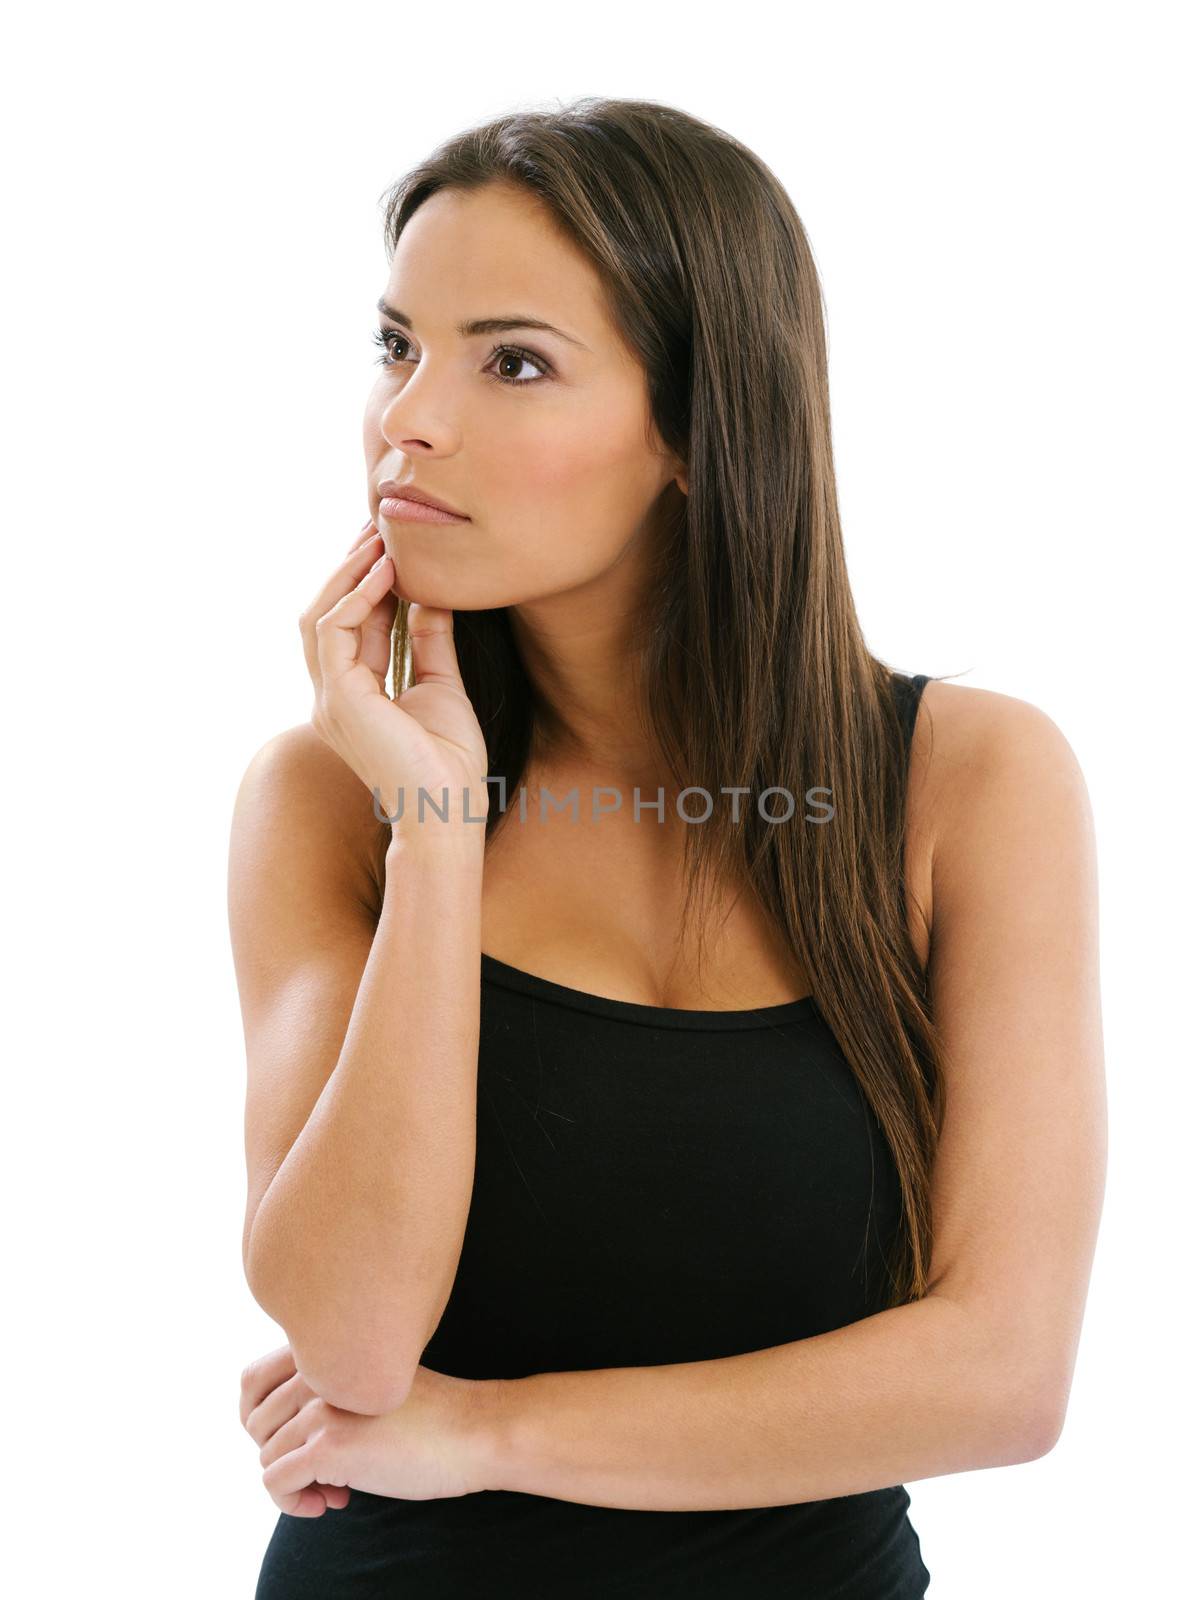 Photo of a beautiful young woman thinking with hand on chin over white background.